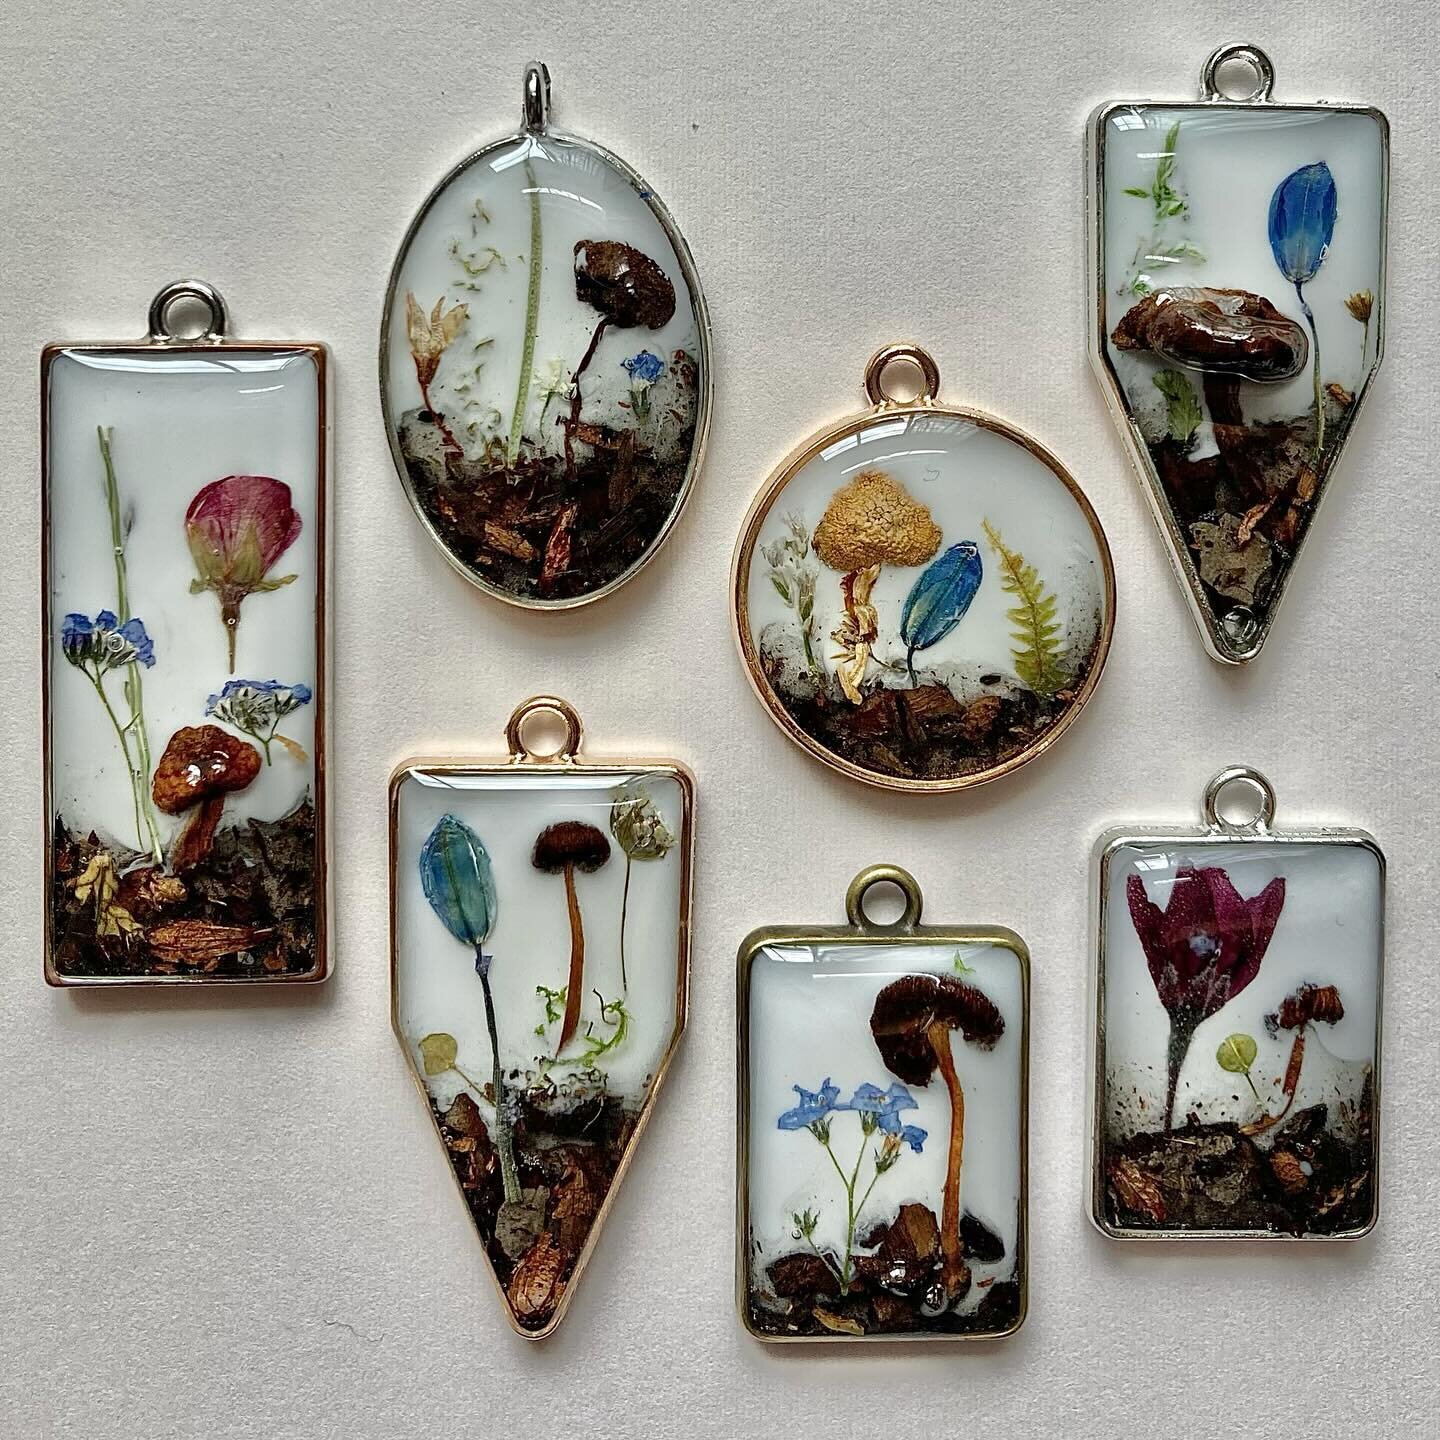 New mushroom landscape pendants for necklaces &amp; earrings, featuring mushrooms how you might find them in their natural habitat in The Berkshires, with grasses, ferns, moss, Siberian squill, soil, and an assortment of flowers. 

🐝 take a piece of